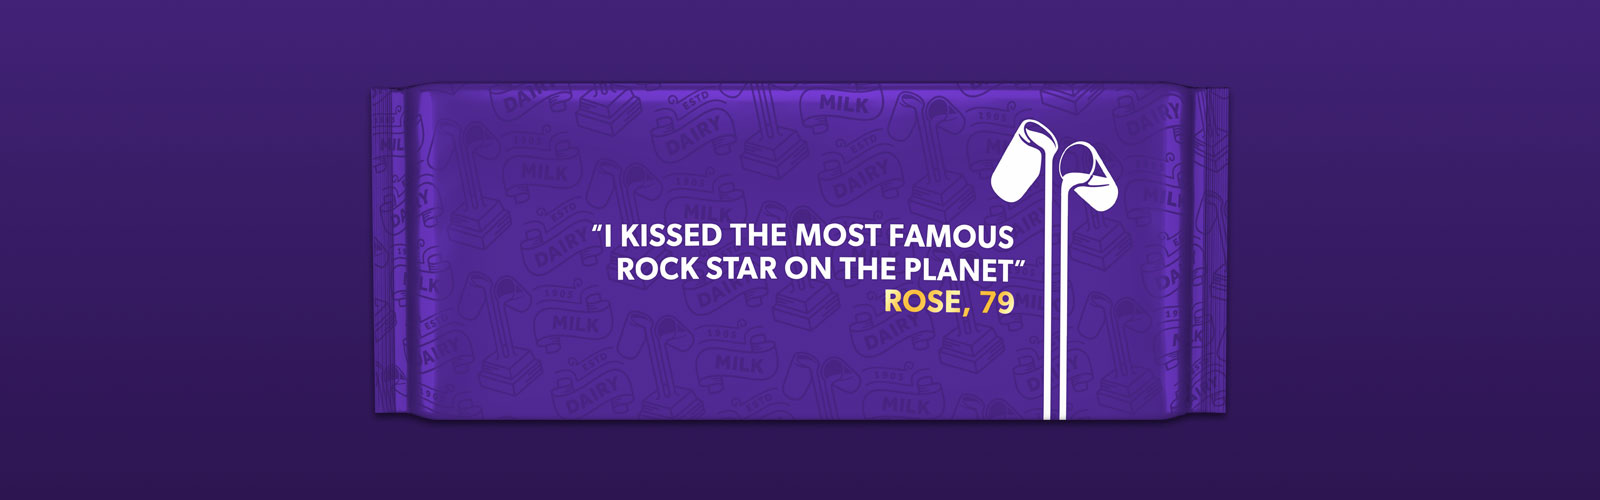 Cadbury's Chocolate Bar with words "I kissed the most famous rock star on the planet", a quote from Rose, 79